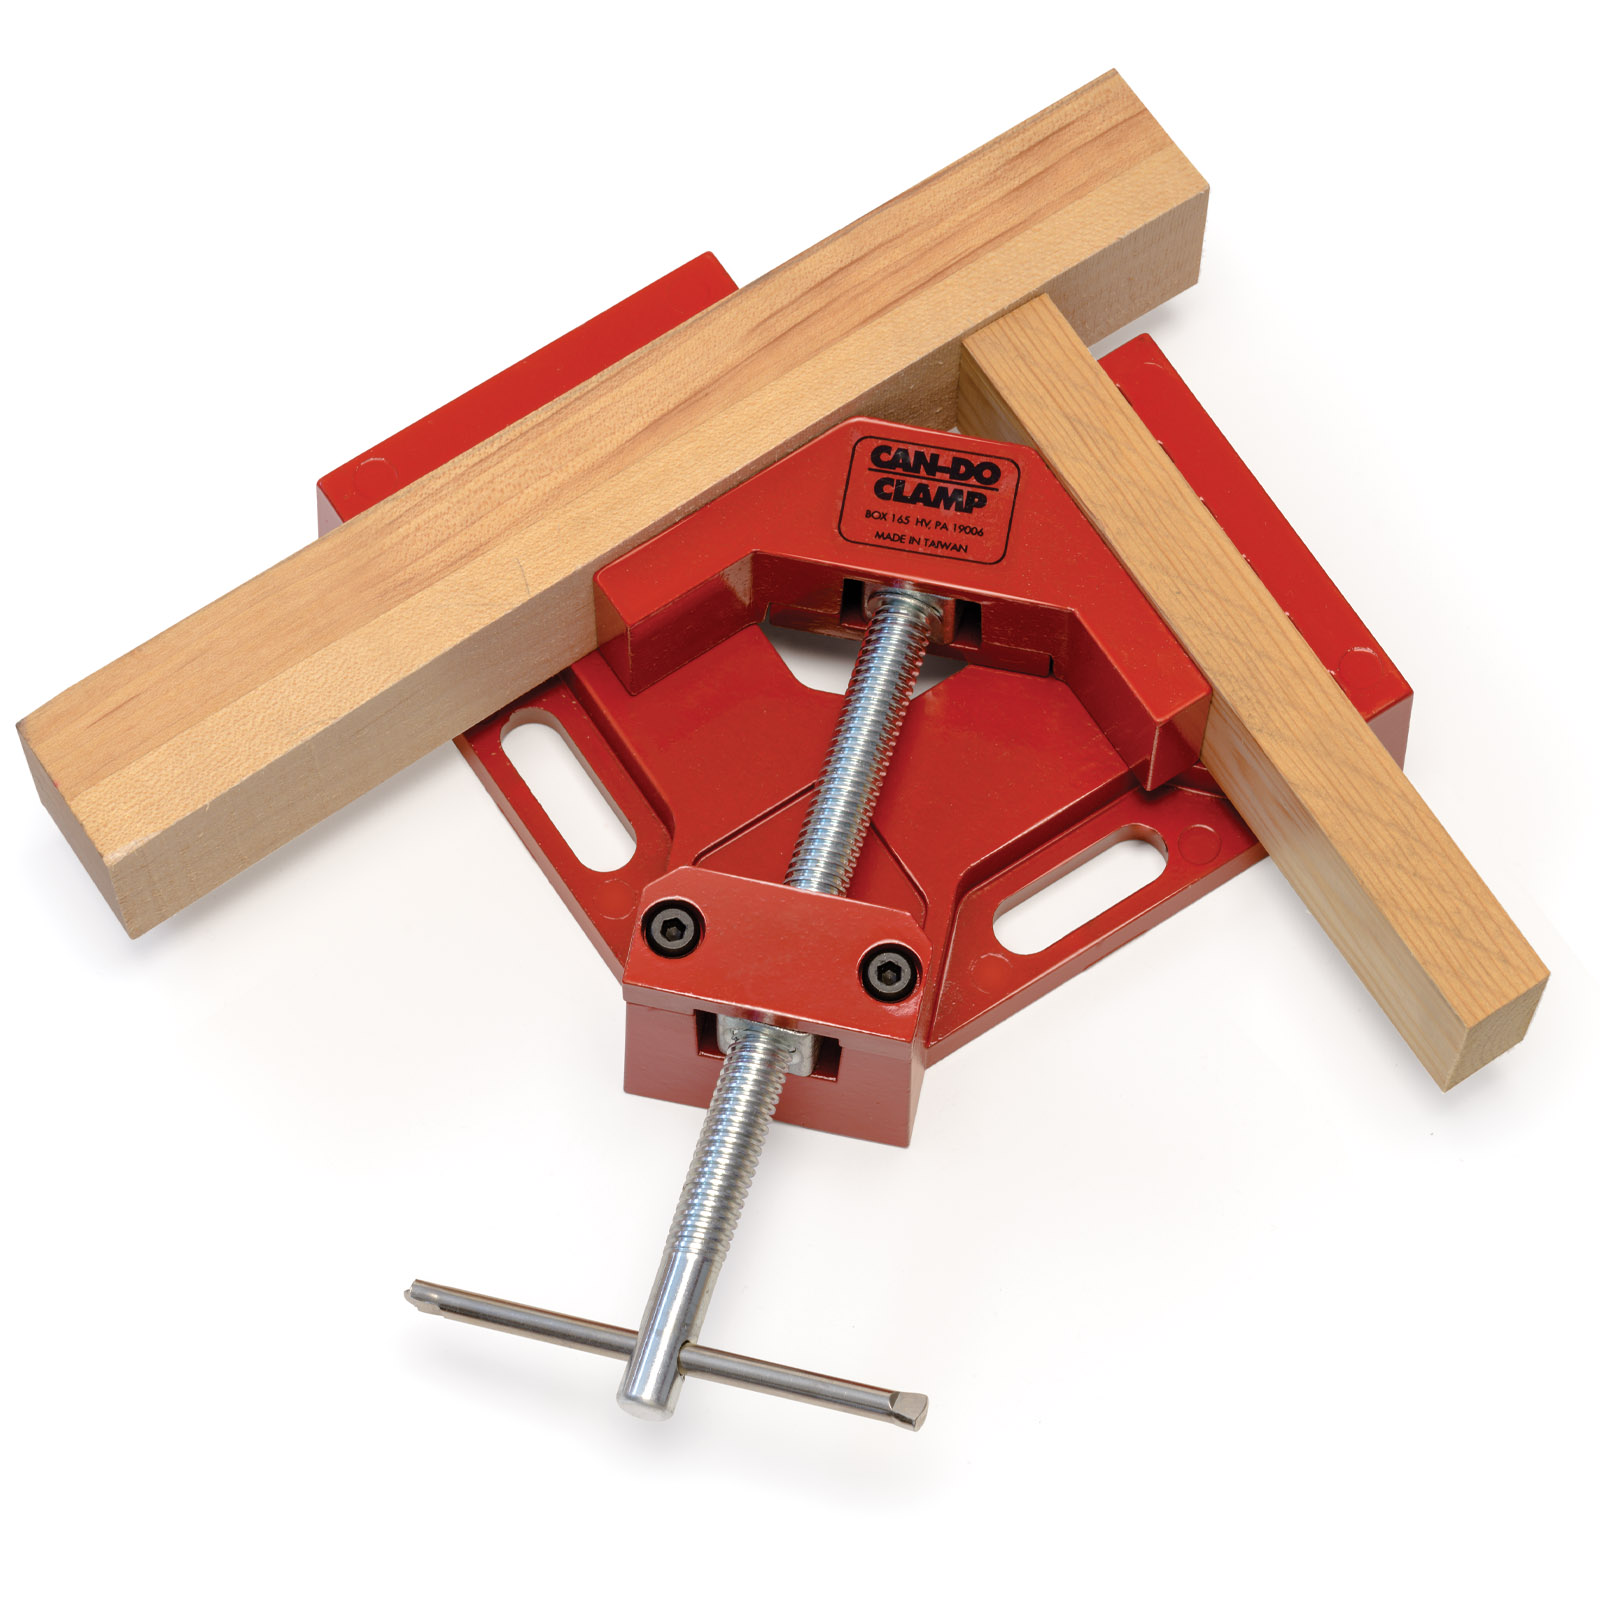 MLCS Woodworking Can-Do Corner Clamp and Vise at Penn State Industries